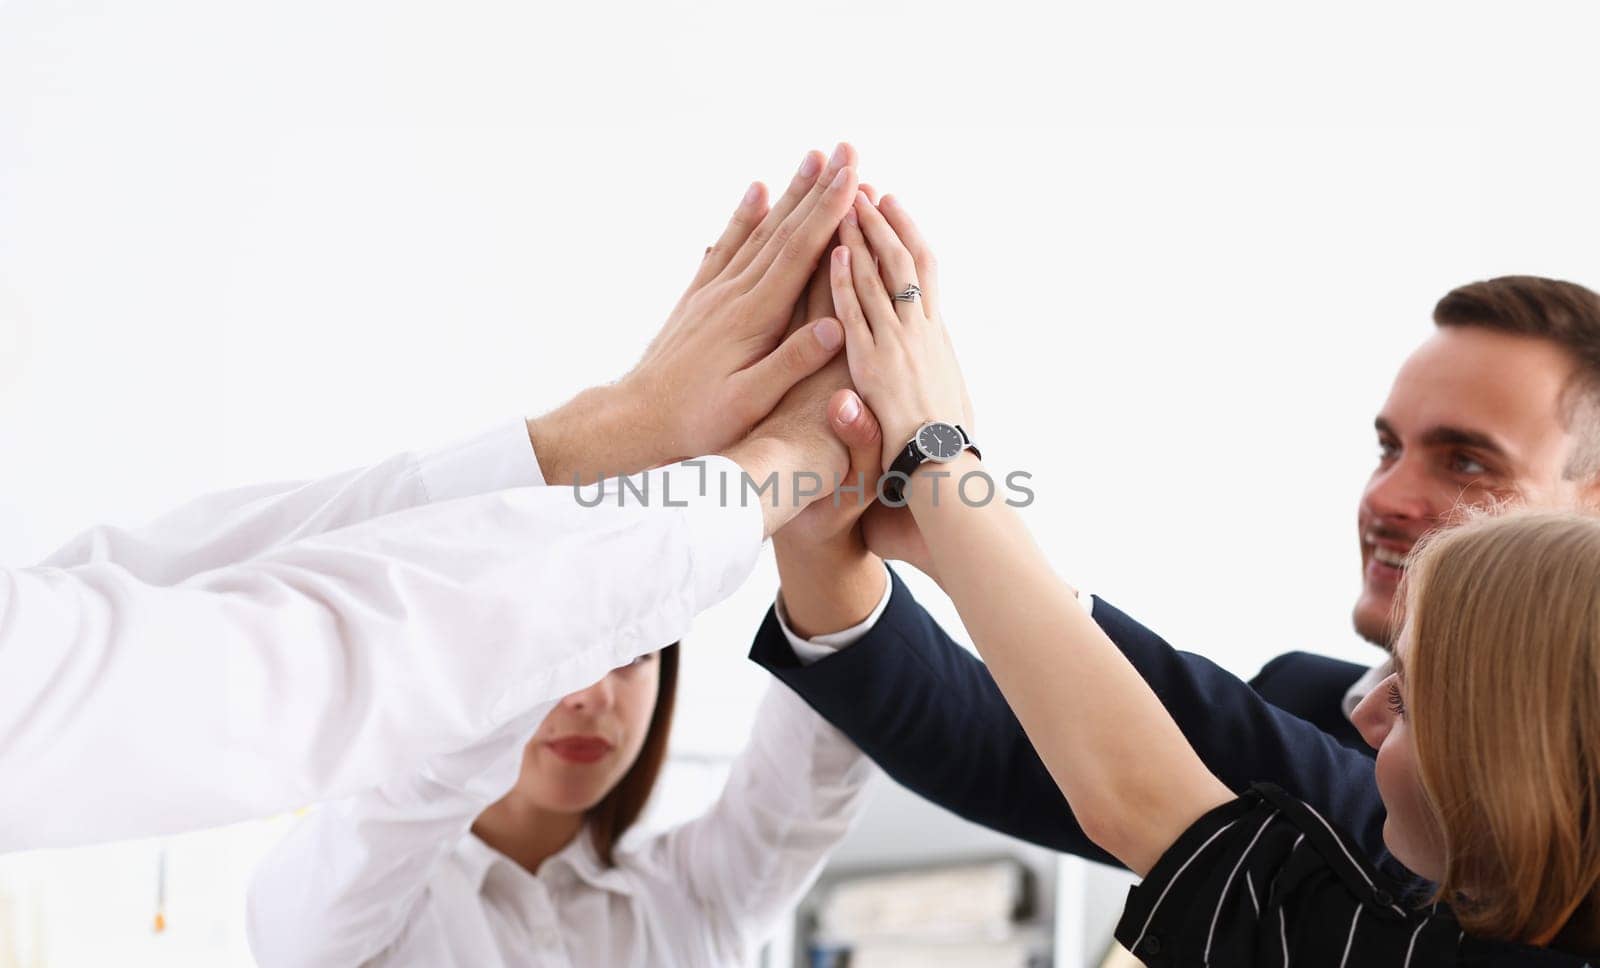 Group of people in suits crossed hands in pile for win closeup. White collar leadership high five cooperation initiative achievement corporate life style friendship deal heap stack concept